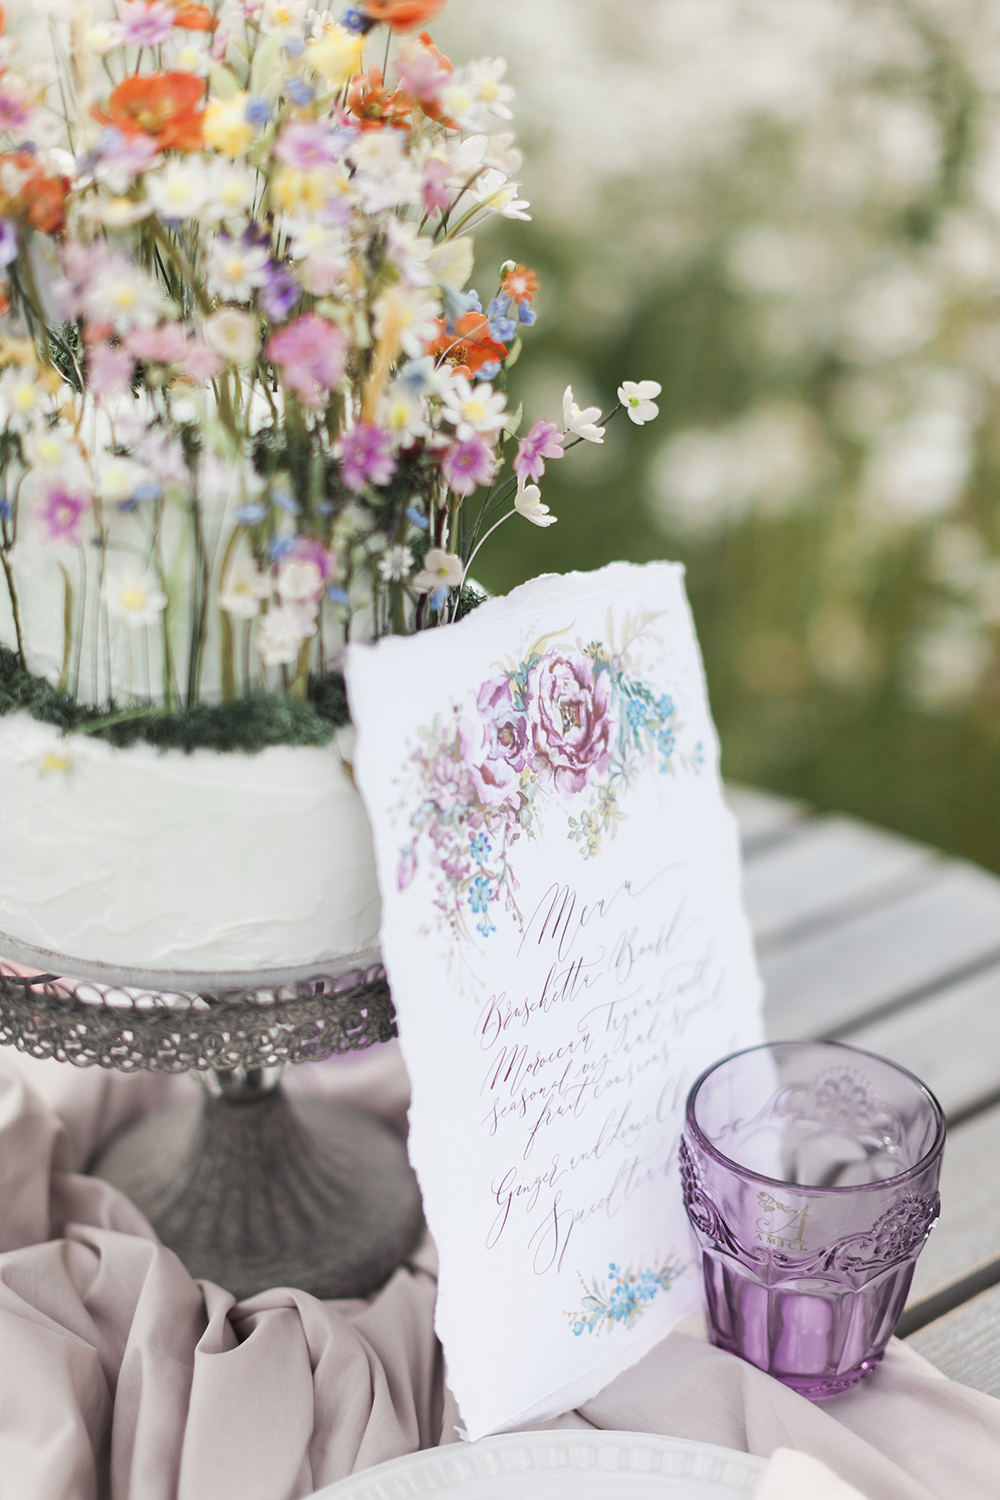 A colourful wedding cake covered in sugar paste wildflowers standing up like a meadow, and a wedding menu with floral illustration and hand calligraphy